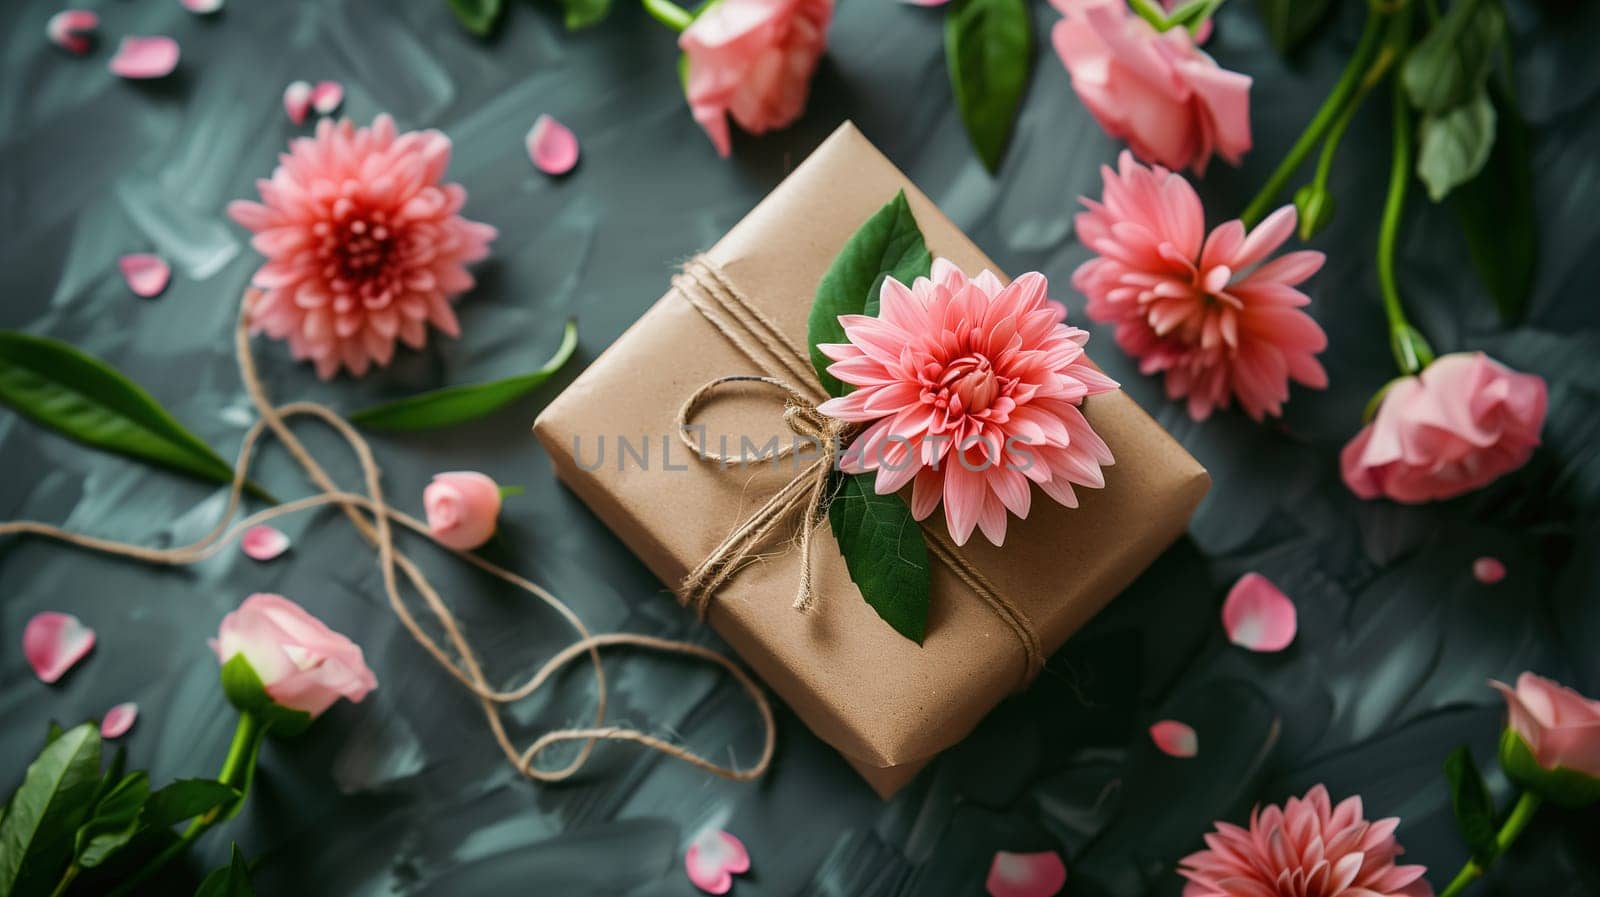 Elegant Mothers Day Gift Surrounded by Vibrant Pink Flowers on a Textured Background by TRMK